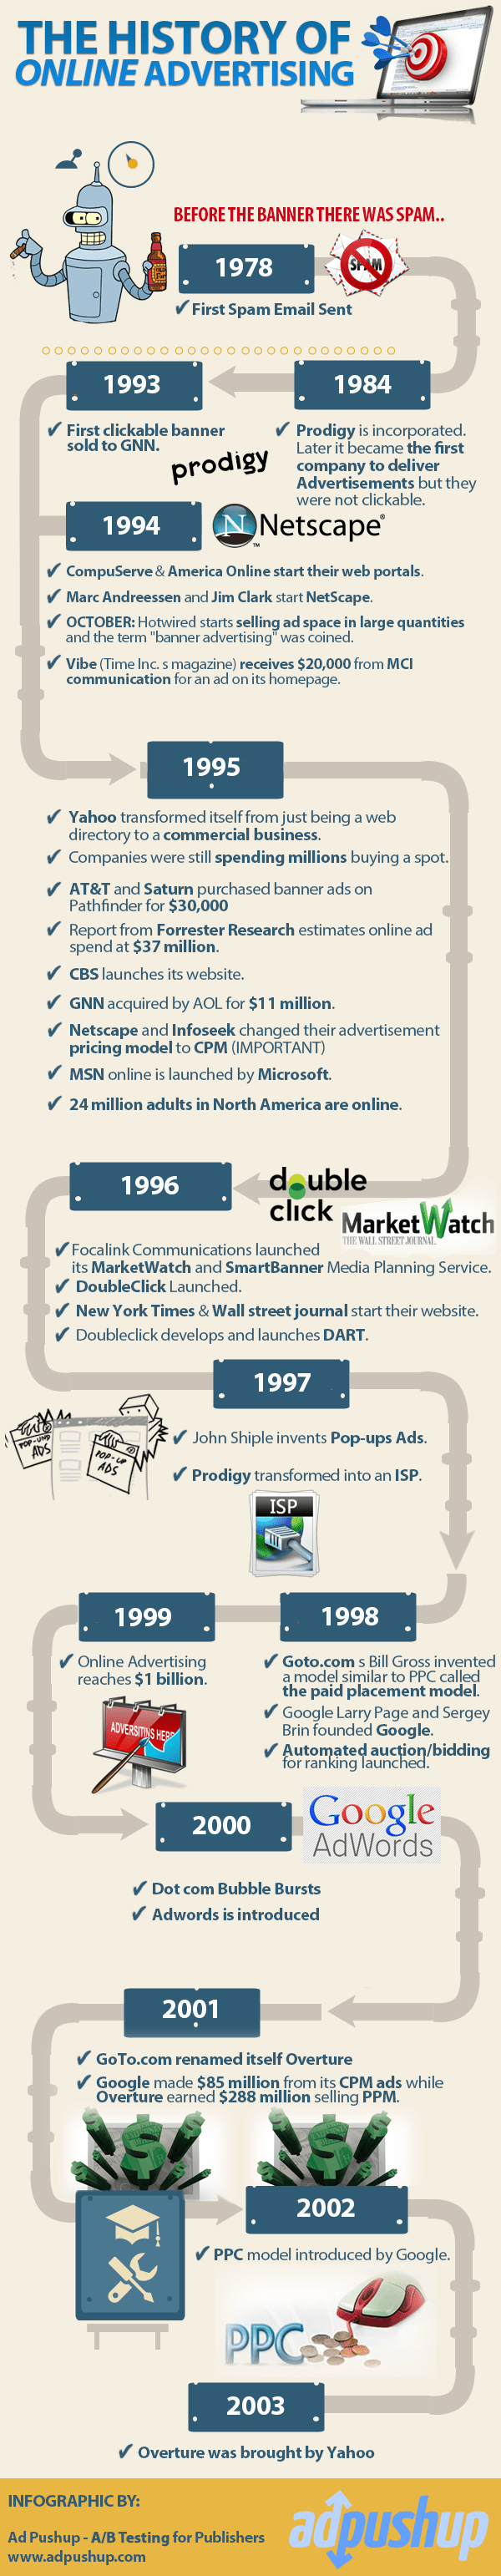 History of Online Advertising